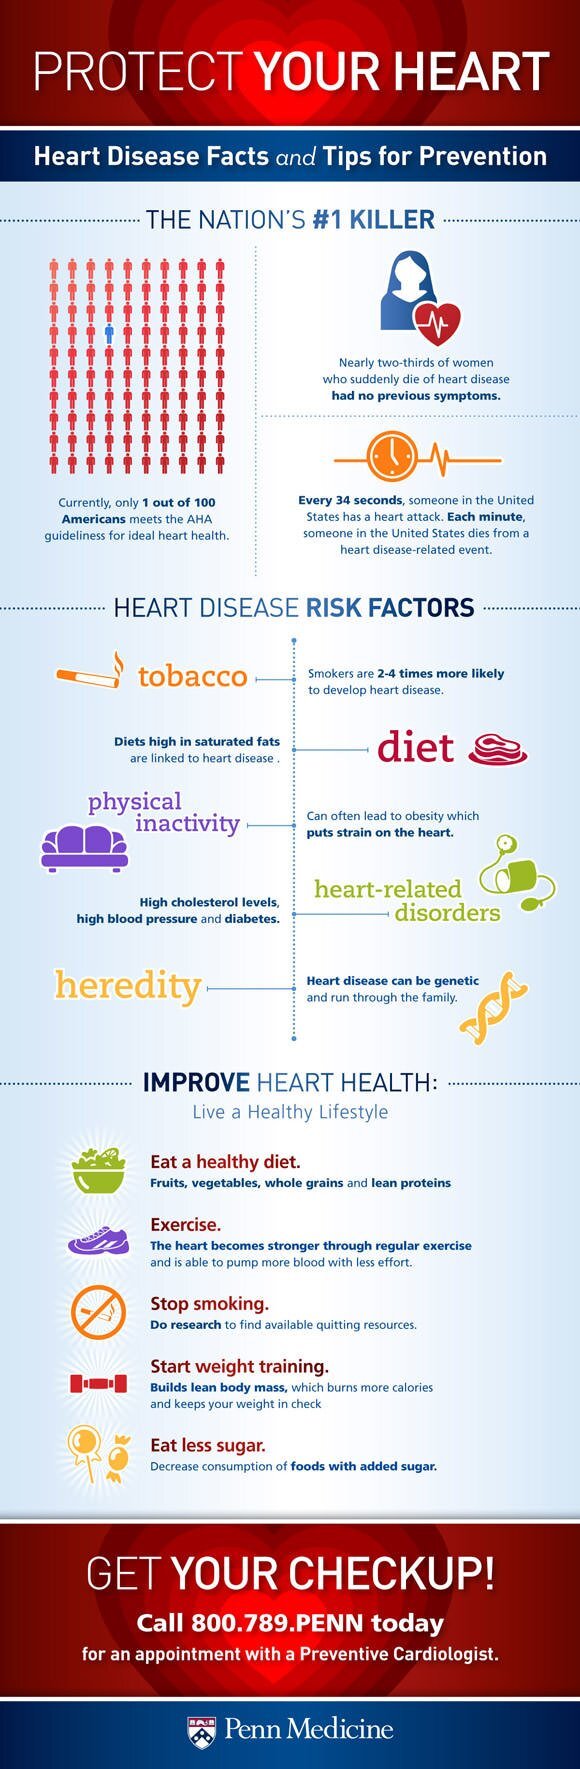 Heart Disease Risk Factors and Prevention Infographic